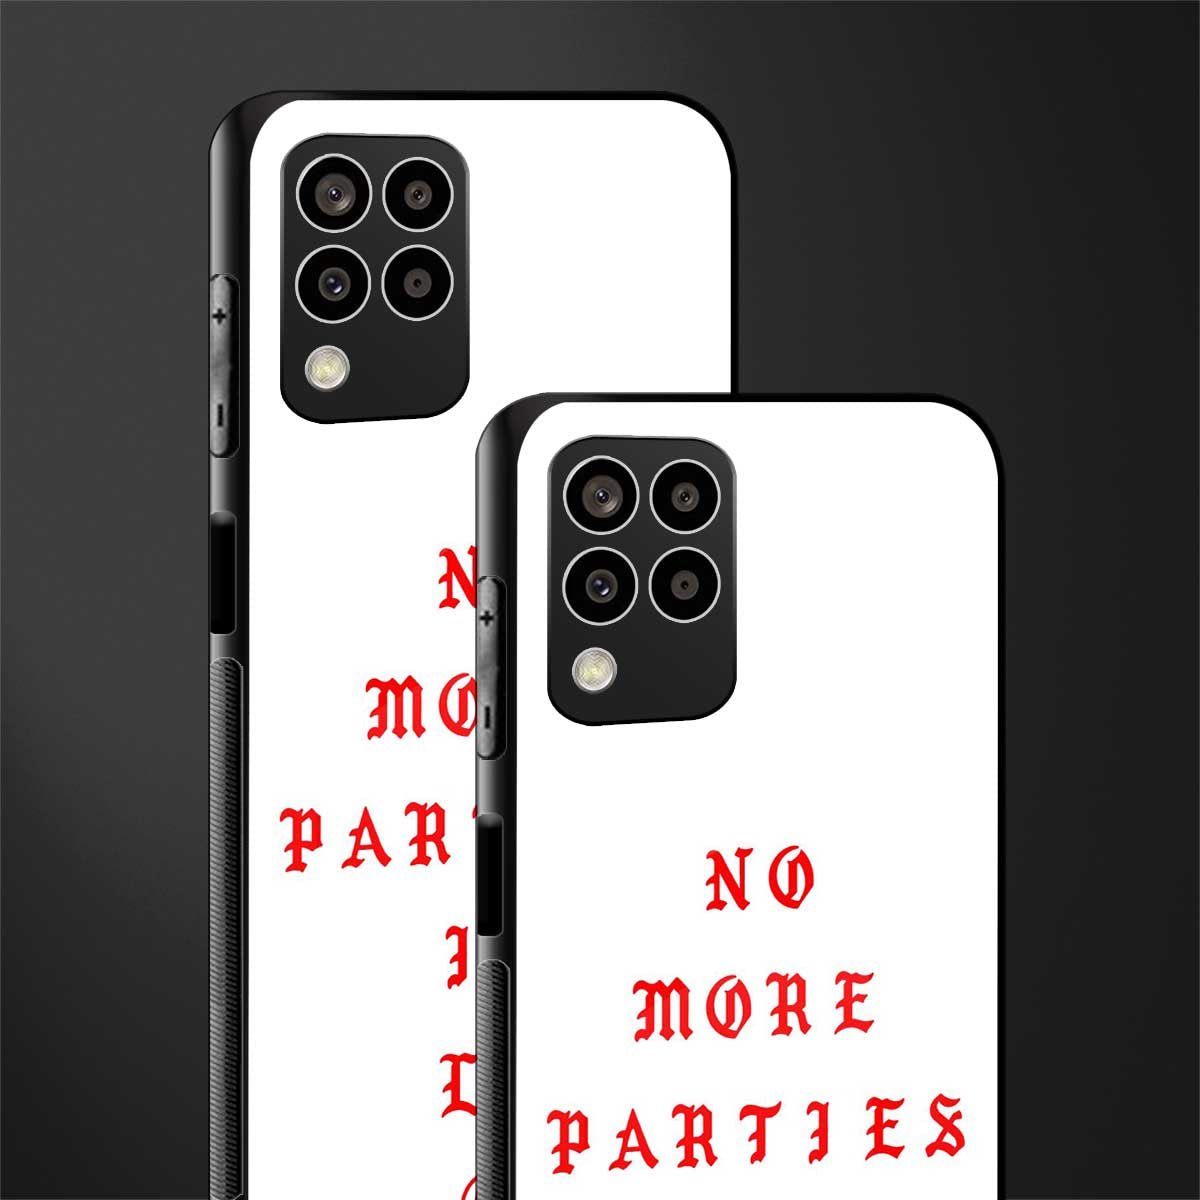 no more parties in la back phone cover | glass case for samsung galaxy m33 5g